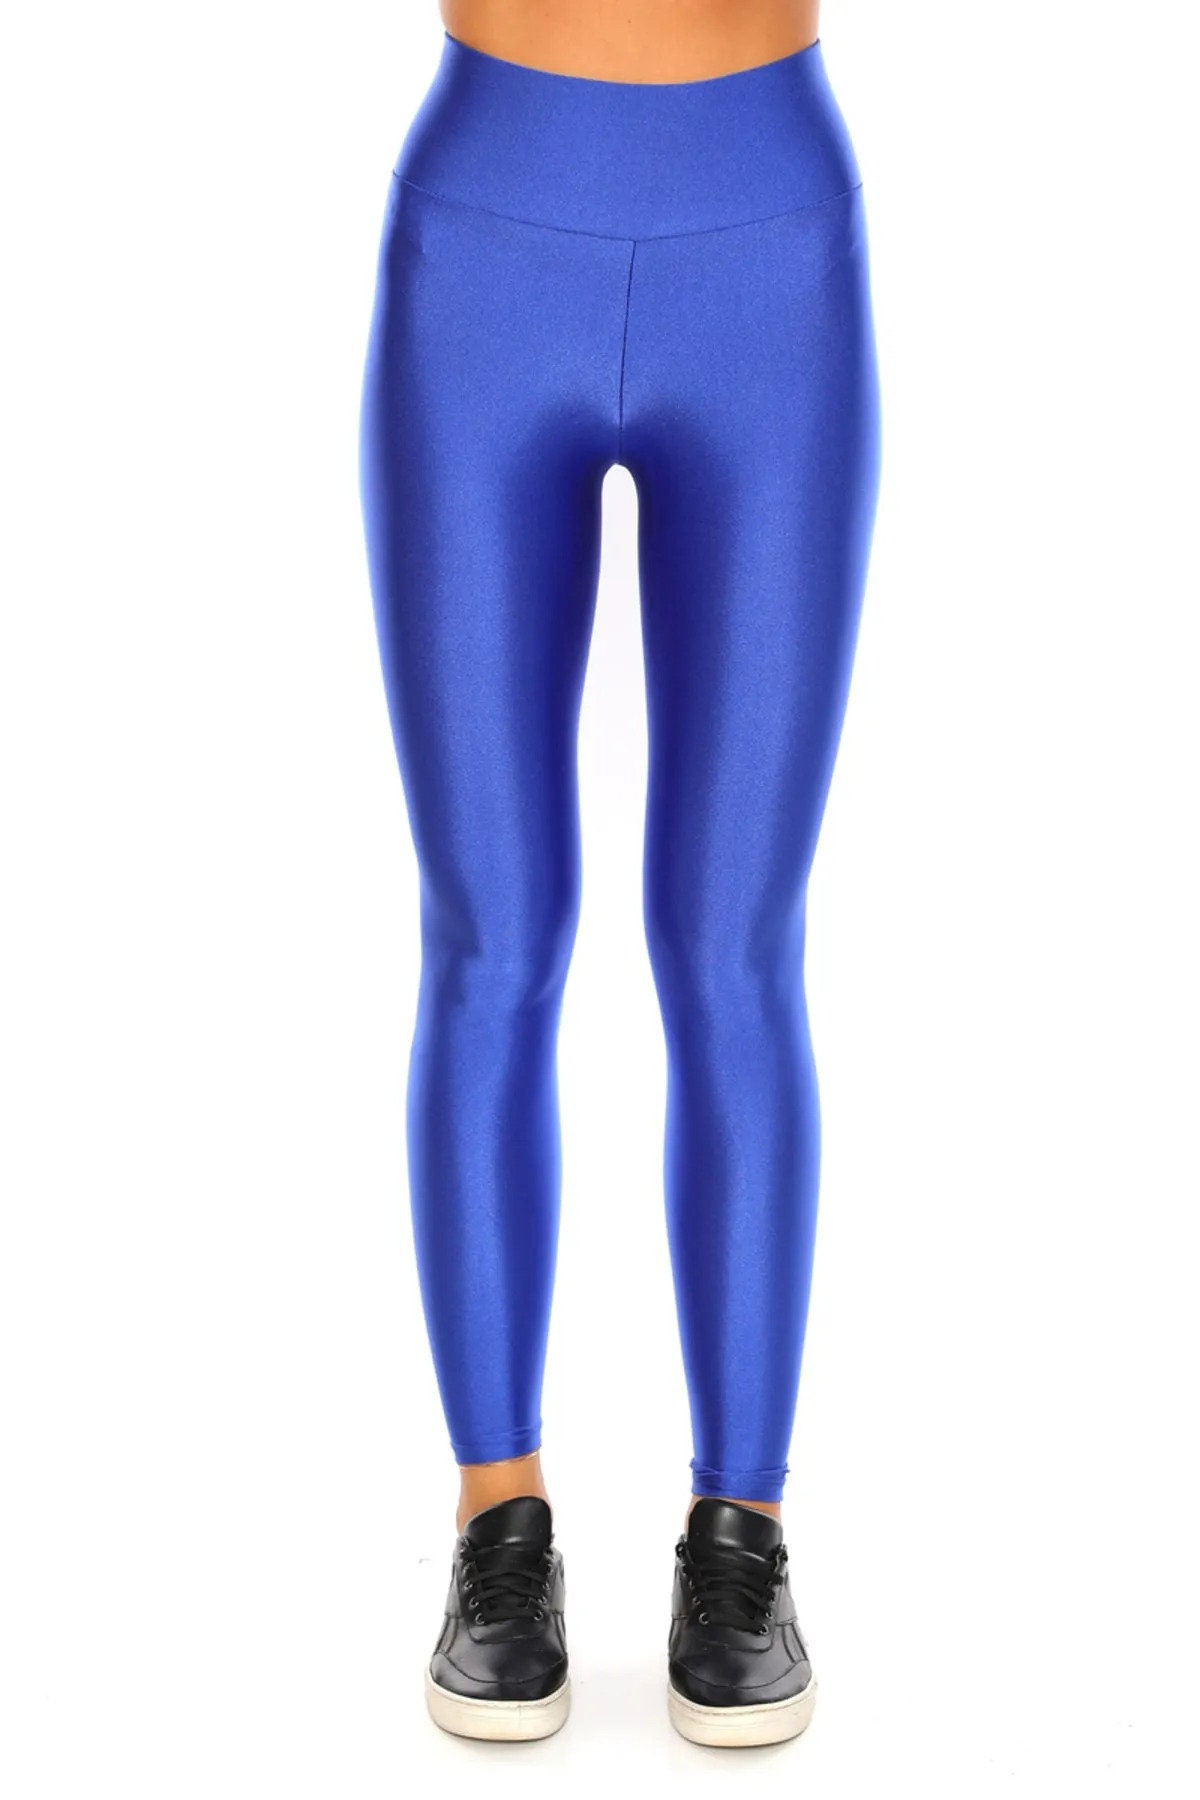 Buy Blue Extra High Waist Shiny Disco Leggings Online in India 